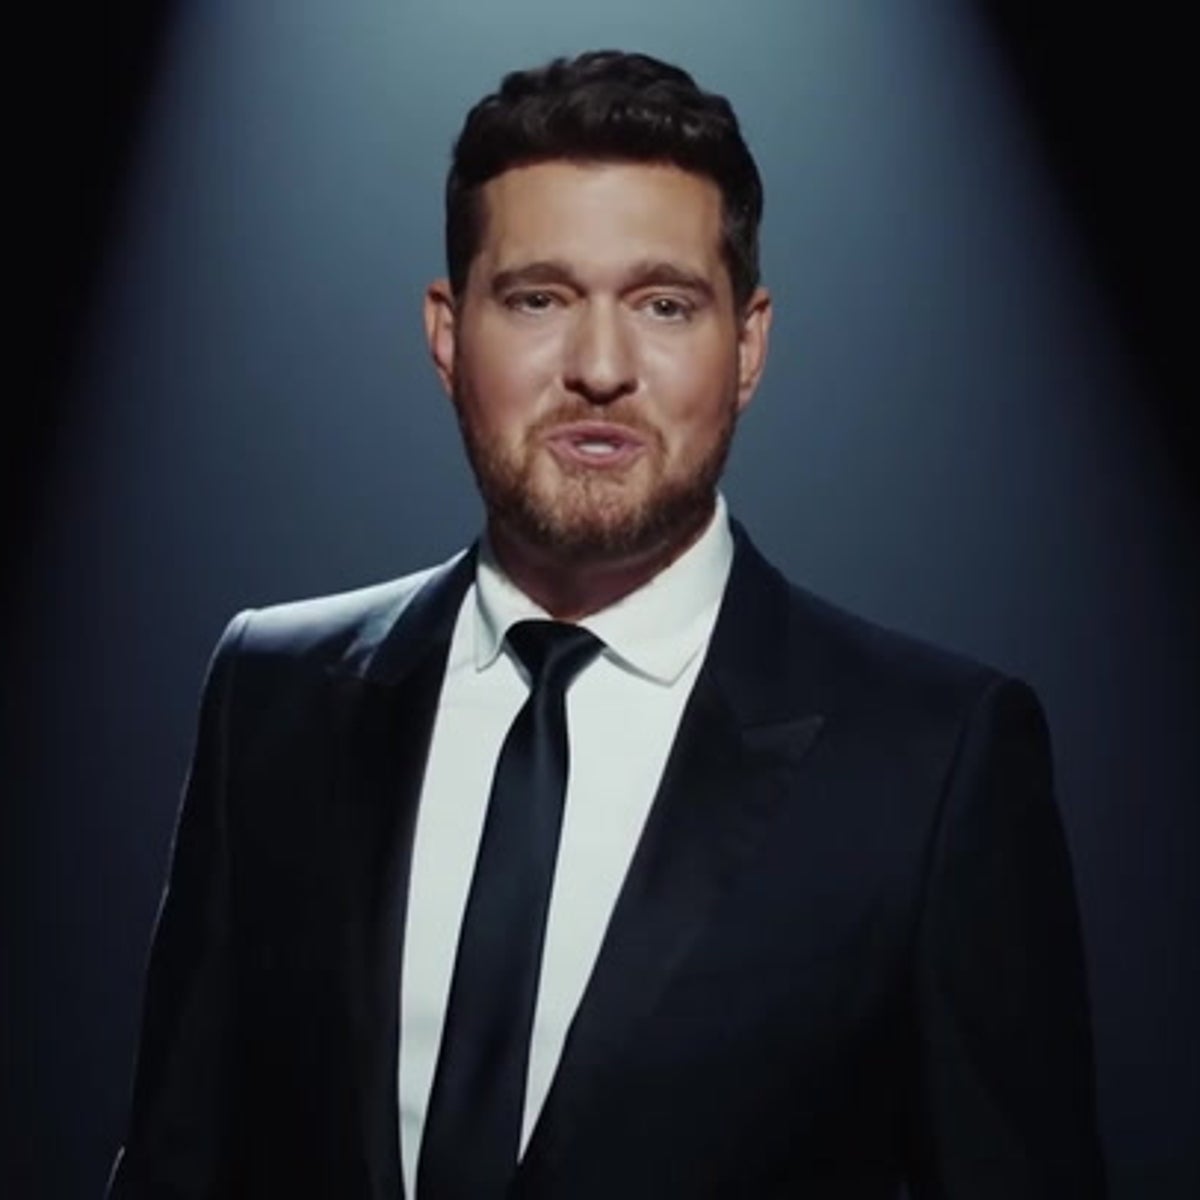 how much did asda pay micheal buble